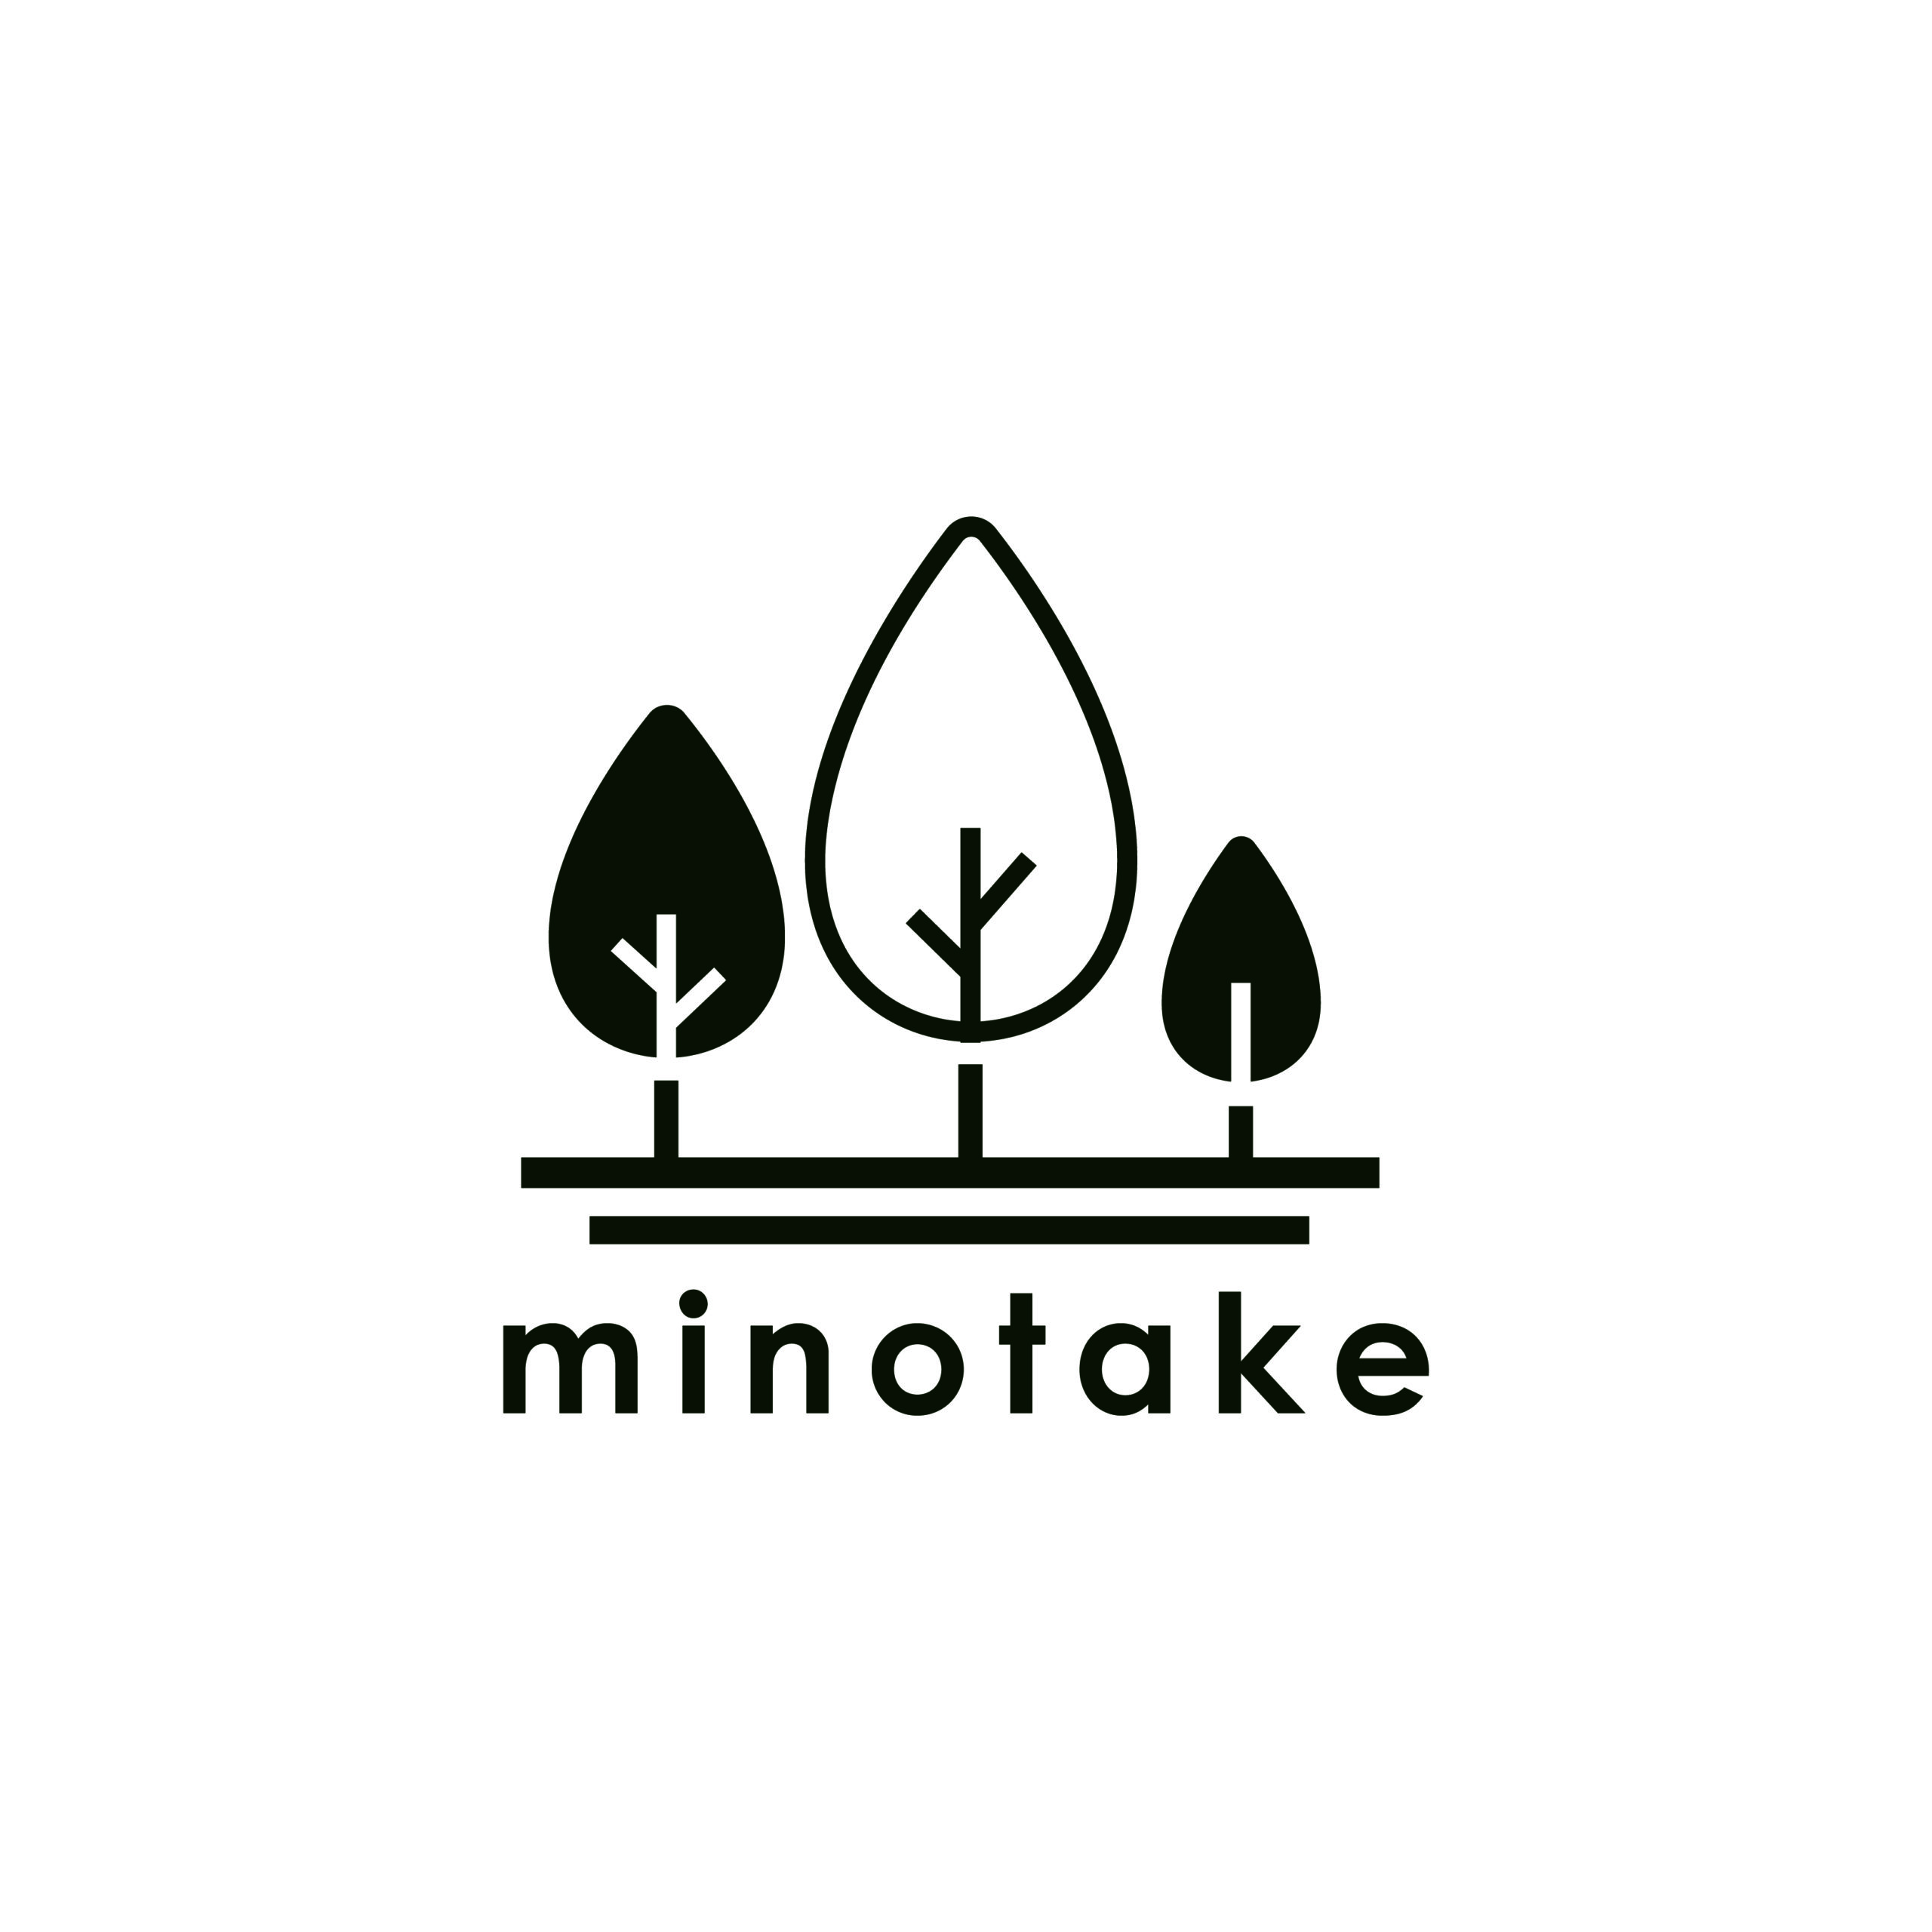 minotake forest works